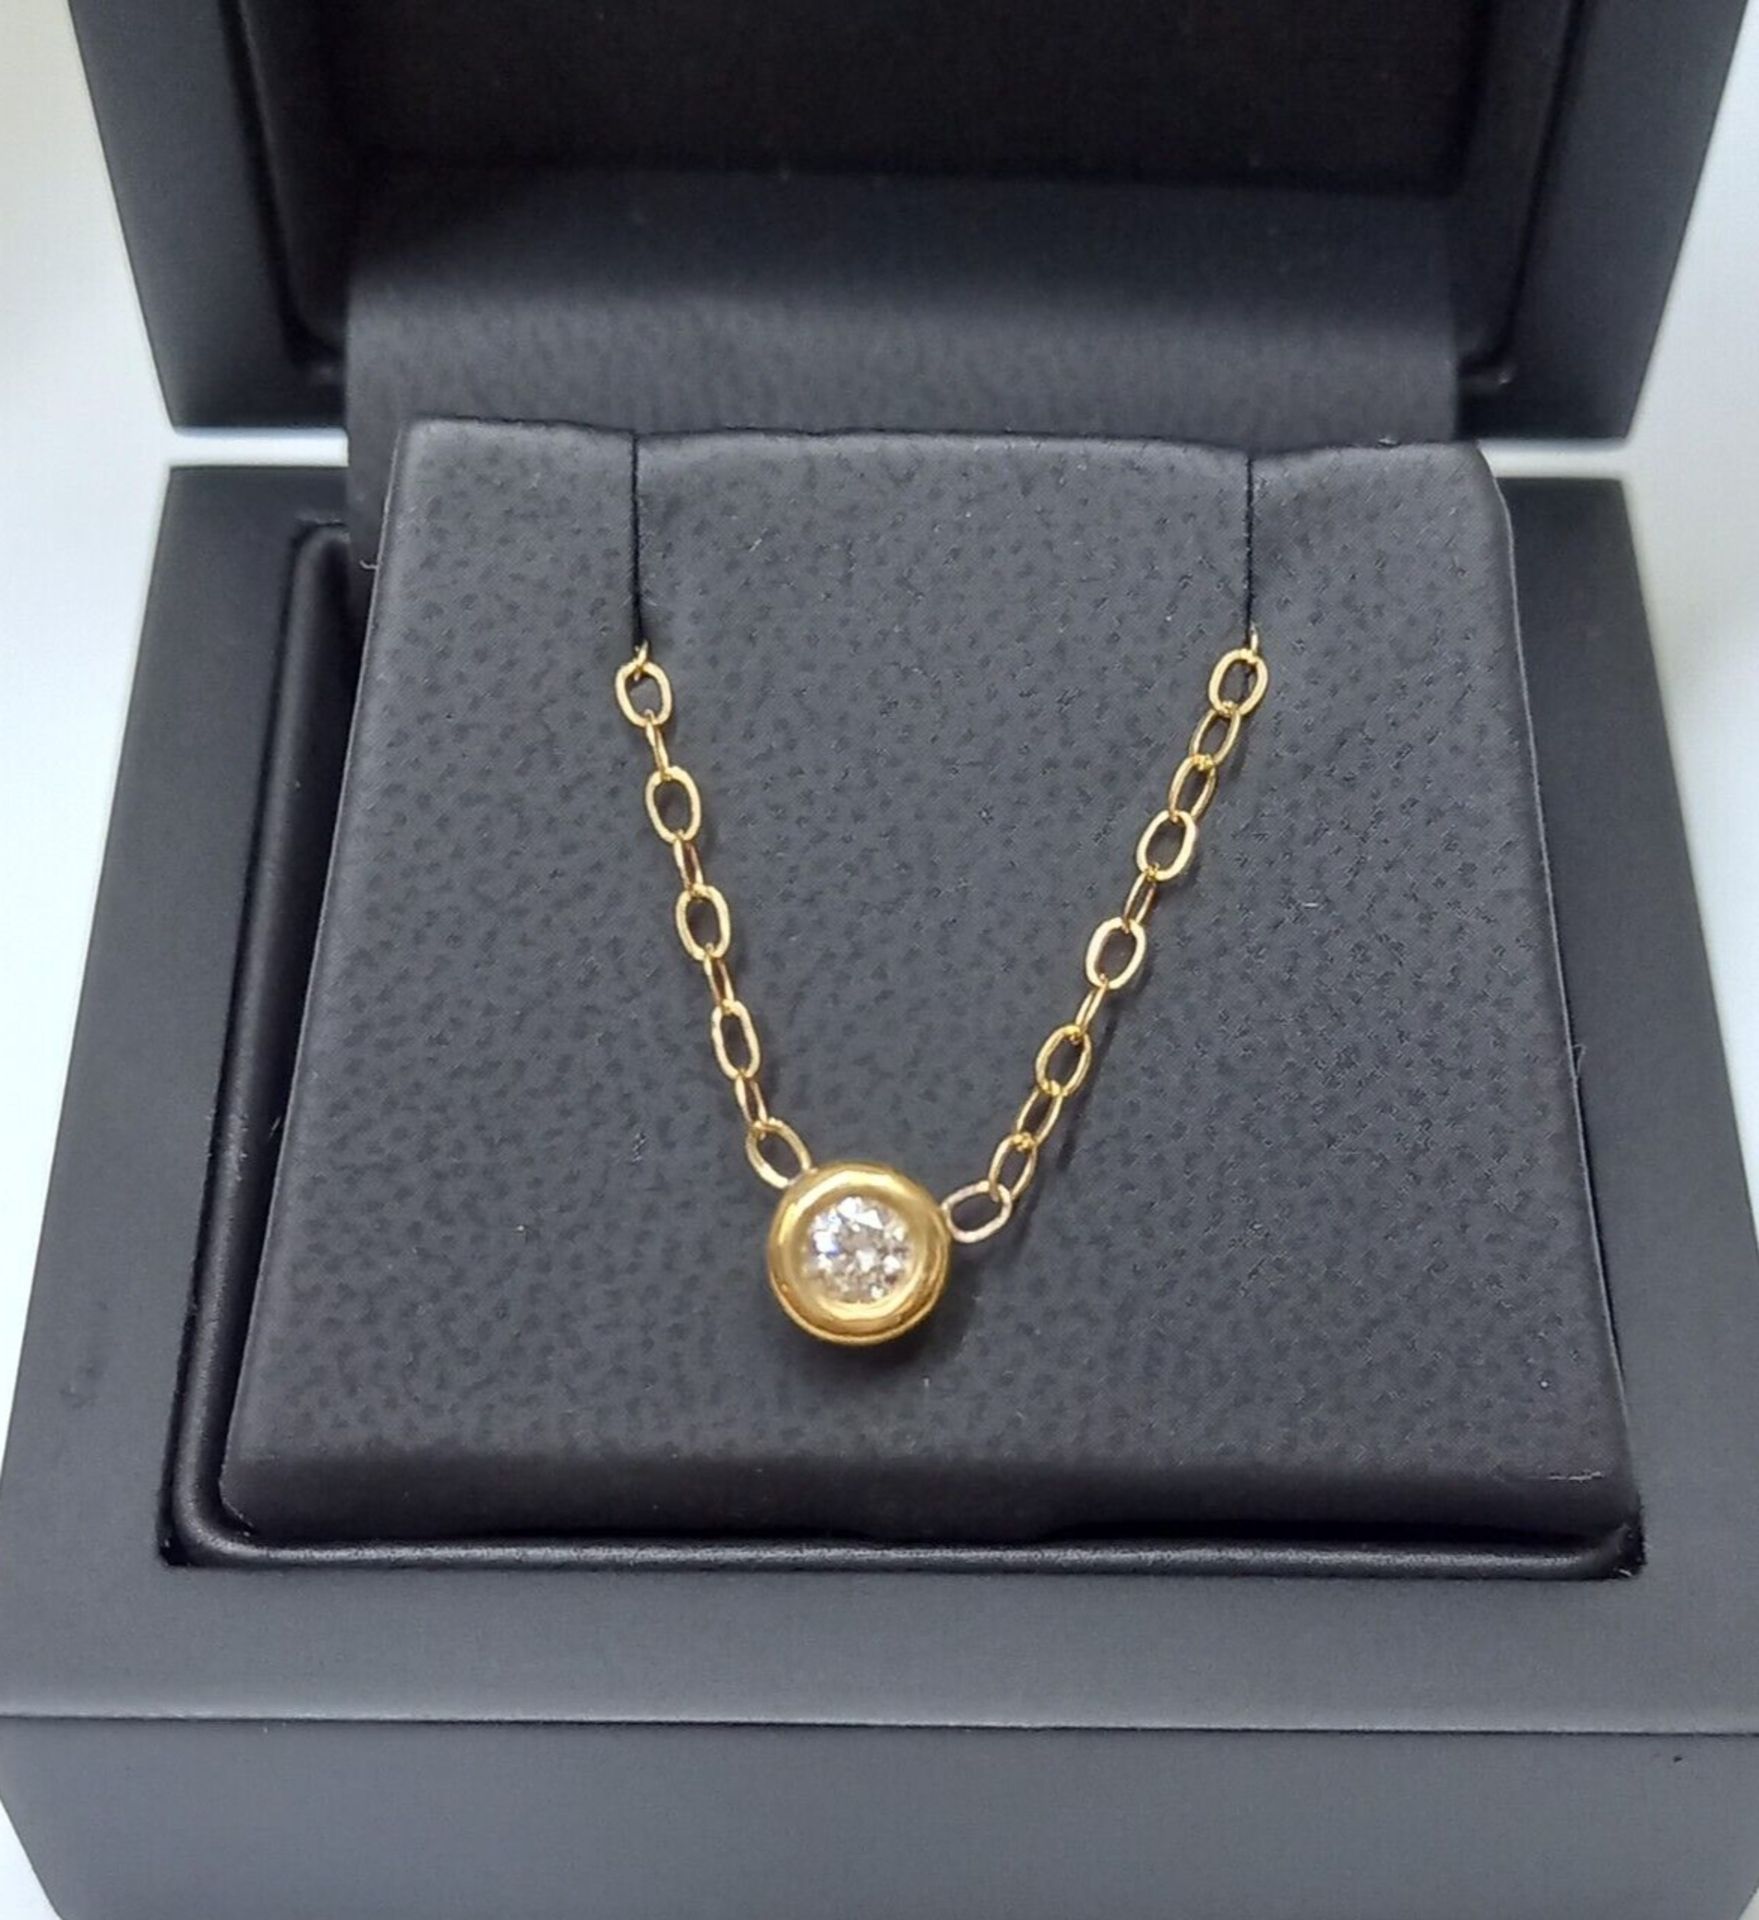 BRILLIANT CUT .25 DIAMOND PENDANT IN 9CT YELLOW GOLD + GIFT BOX WITH VALUATION CERTIFICATE OF £1,795